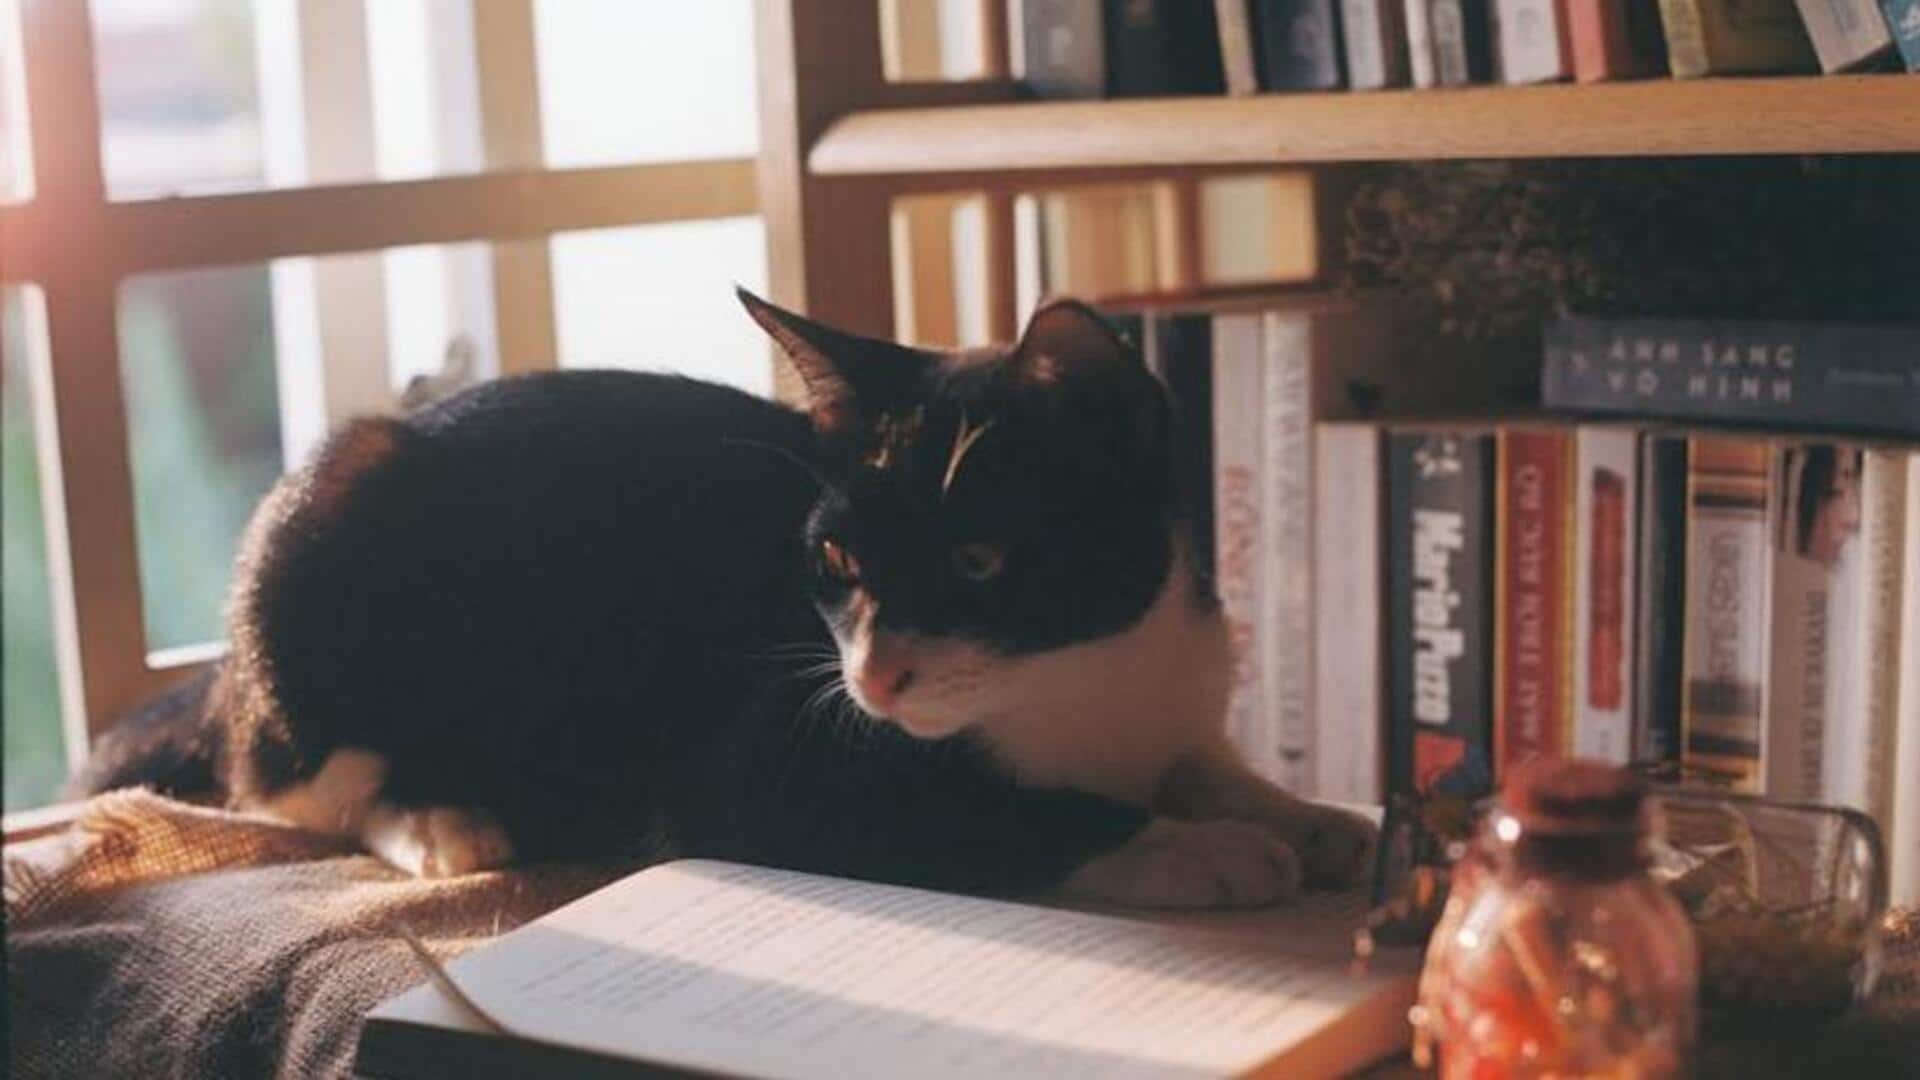 Unraveling cat mysteries with these amazing feline sleuth books